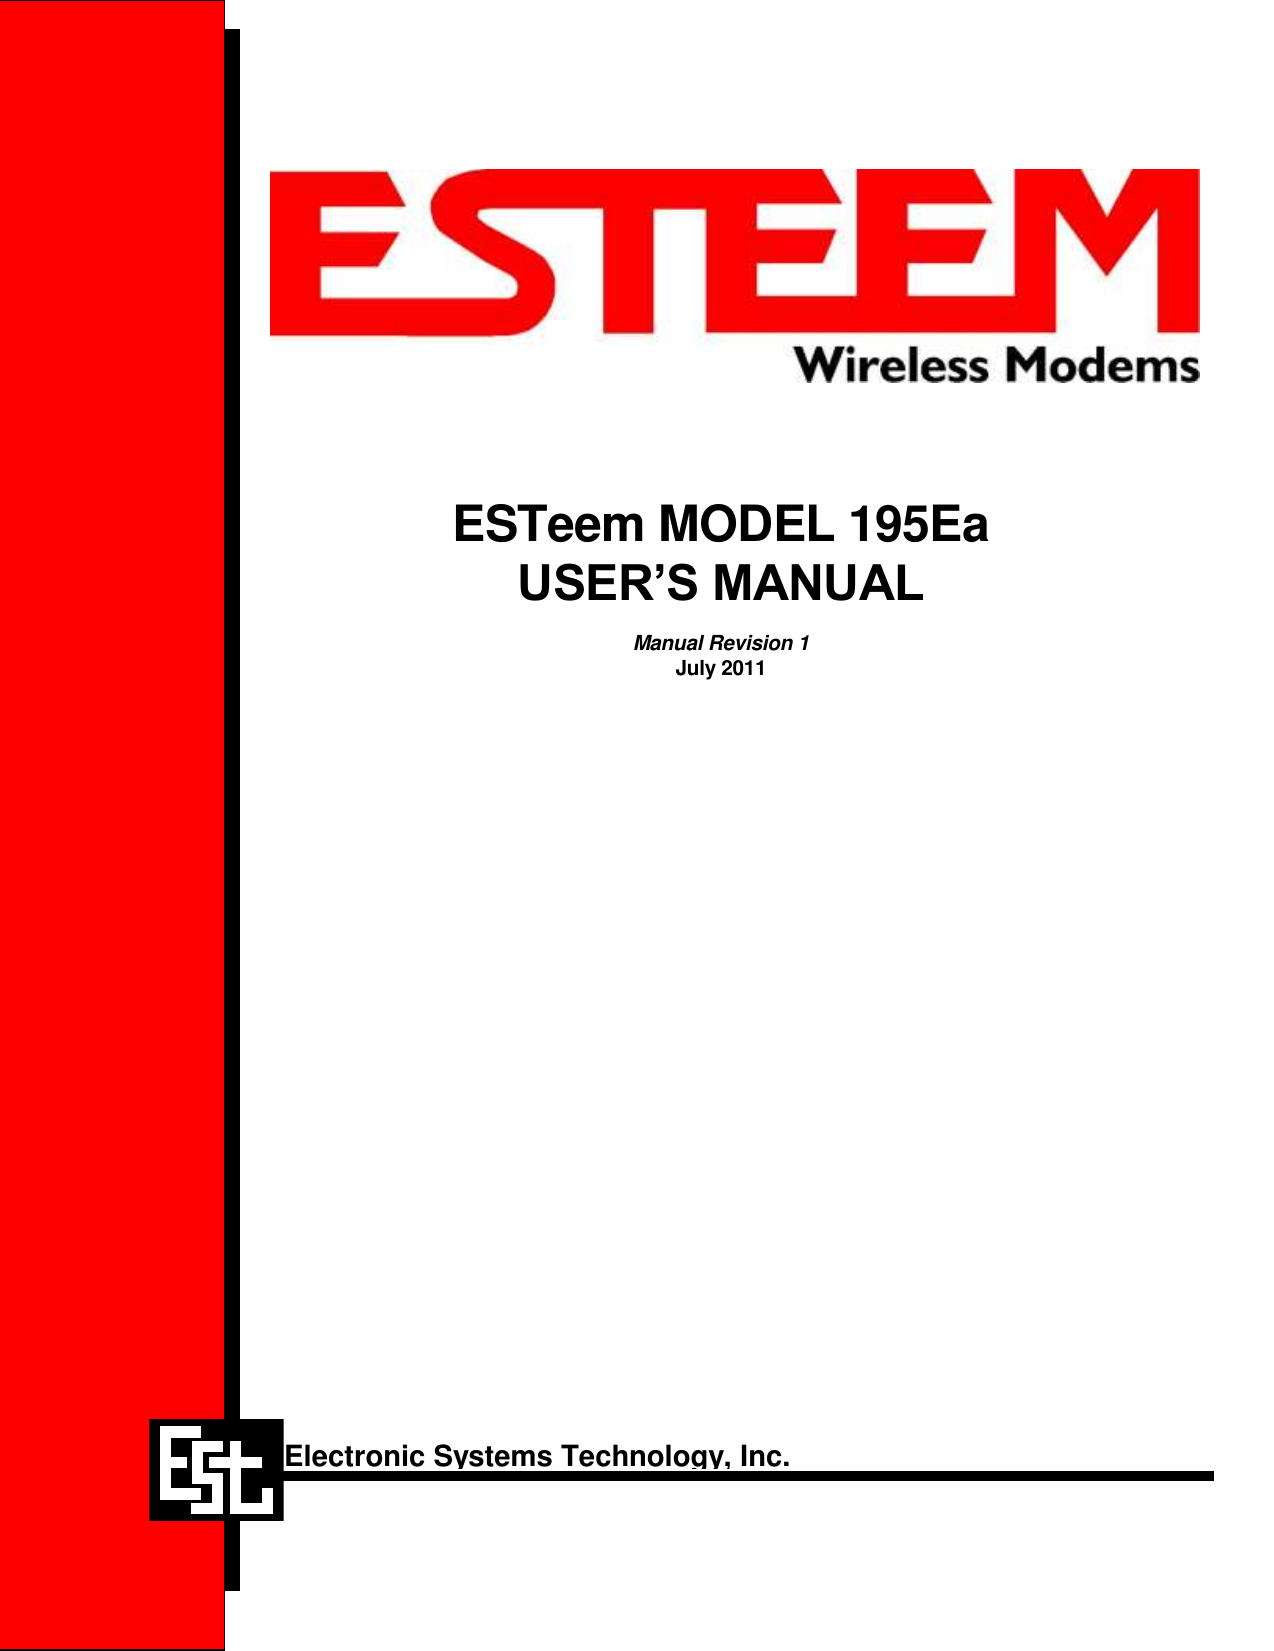                  ESTeem MODEL 195Ea USER’S MANUAL  Manual Revision 1 July 2011      Electronic Systems Technology, Inc. 